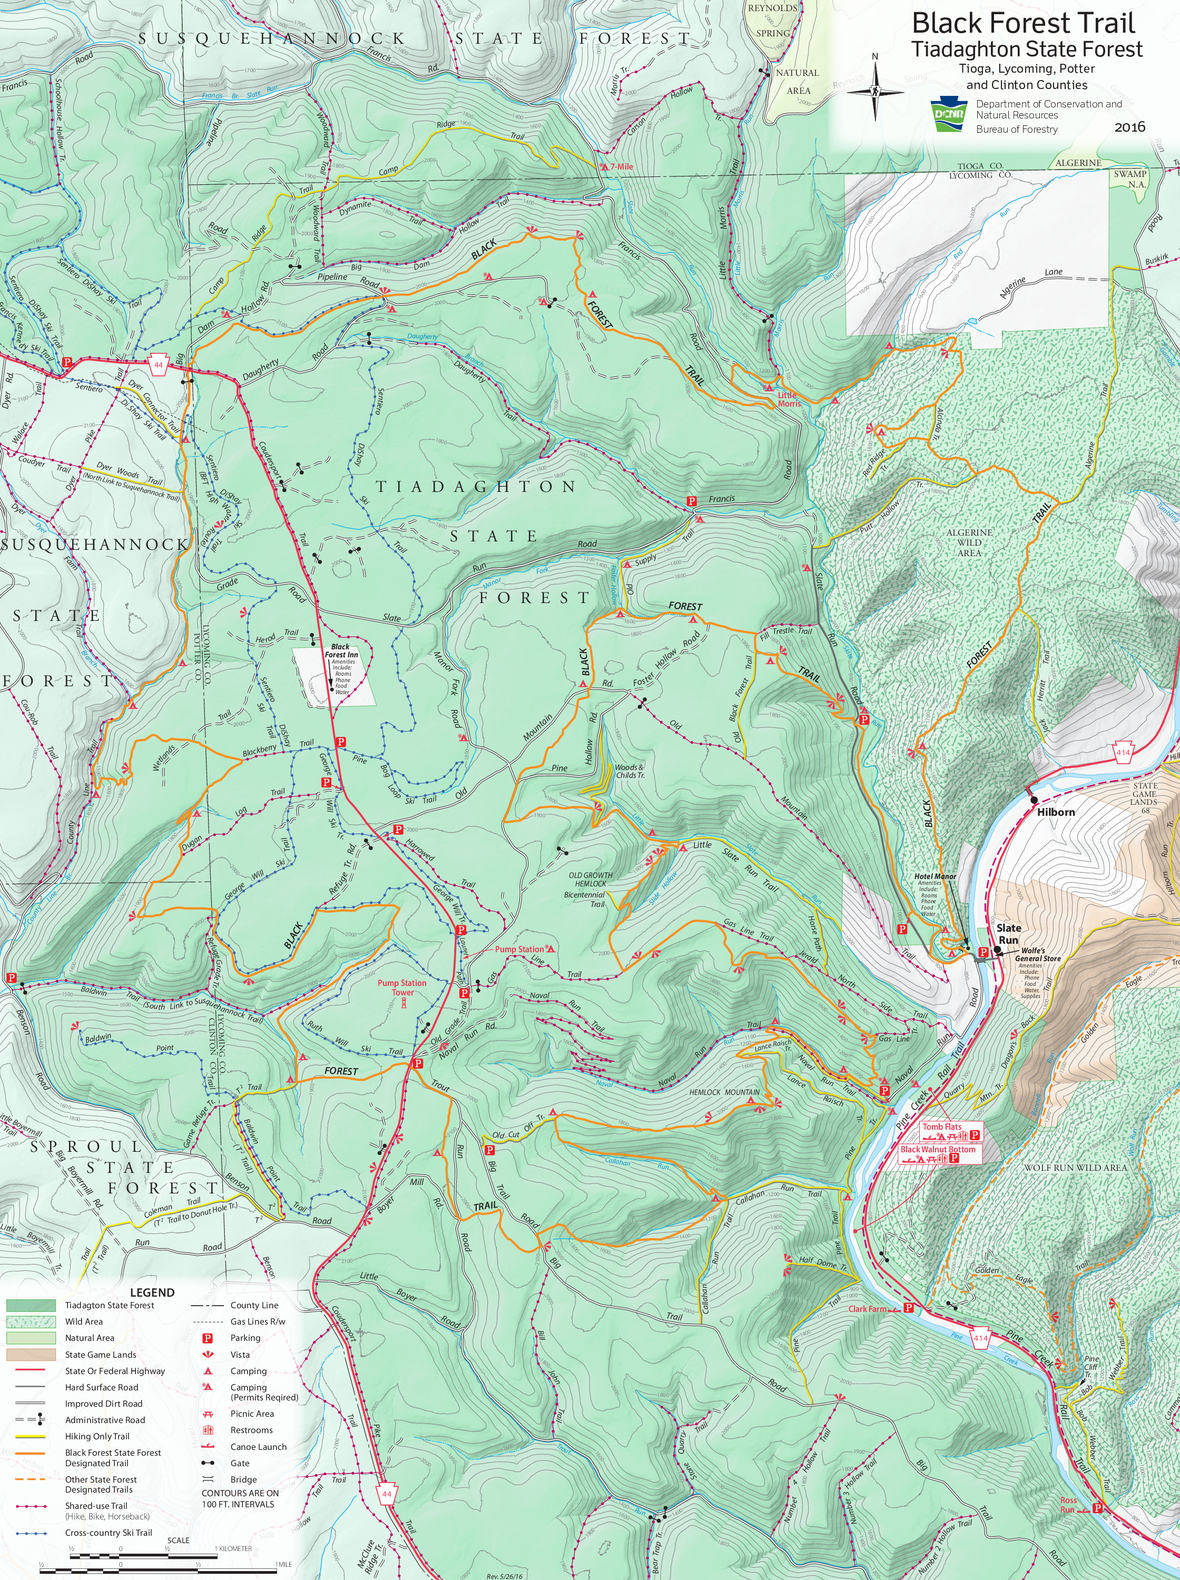 hiking-black-forest-trail-map-dcnr-20032741